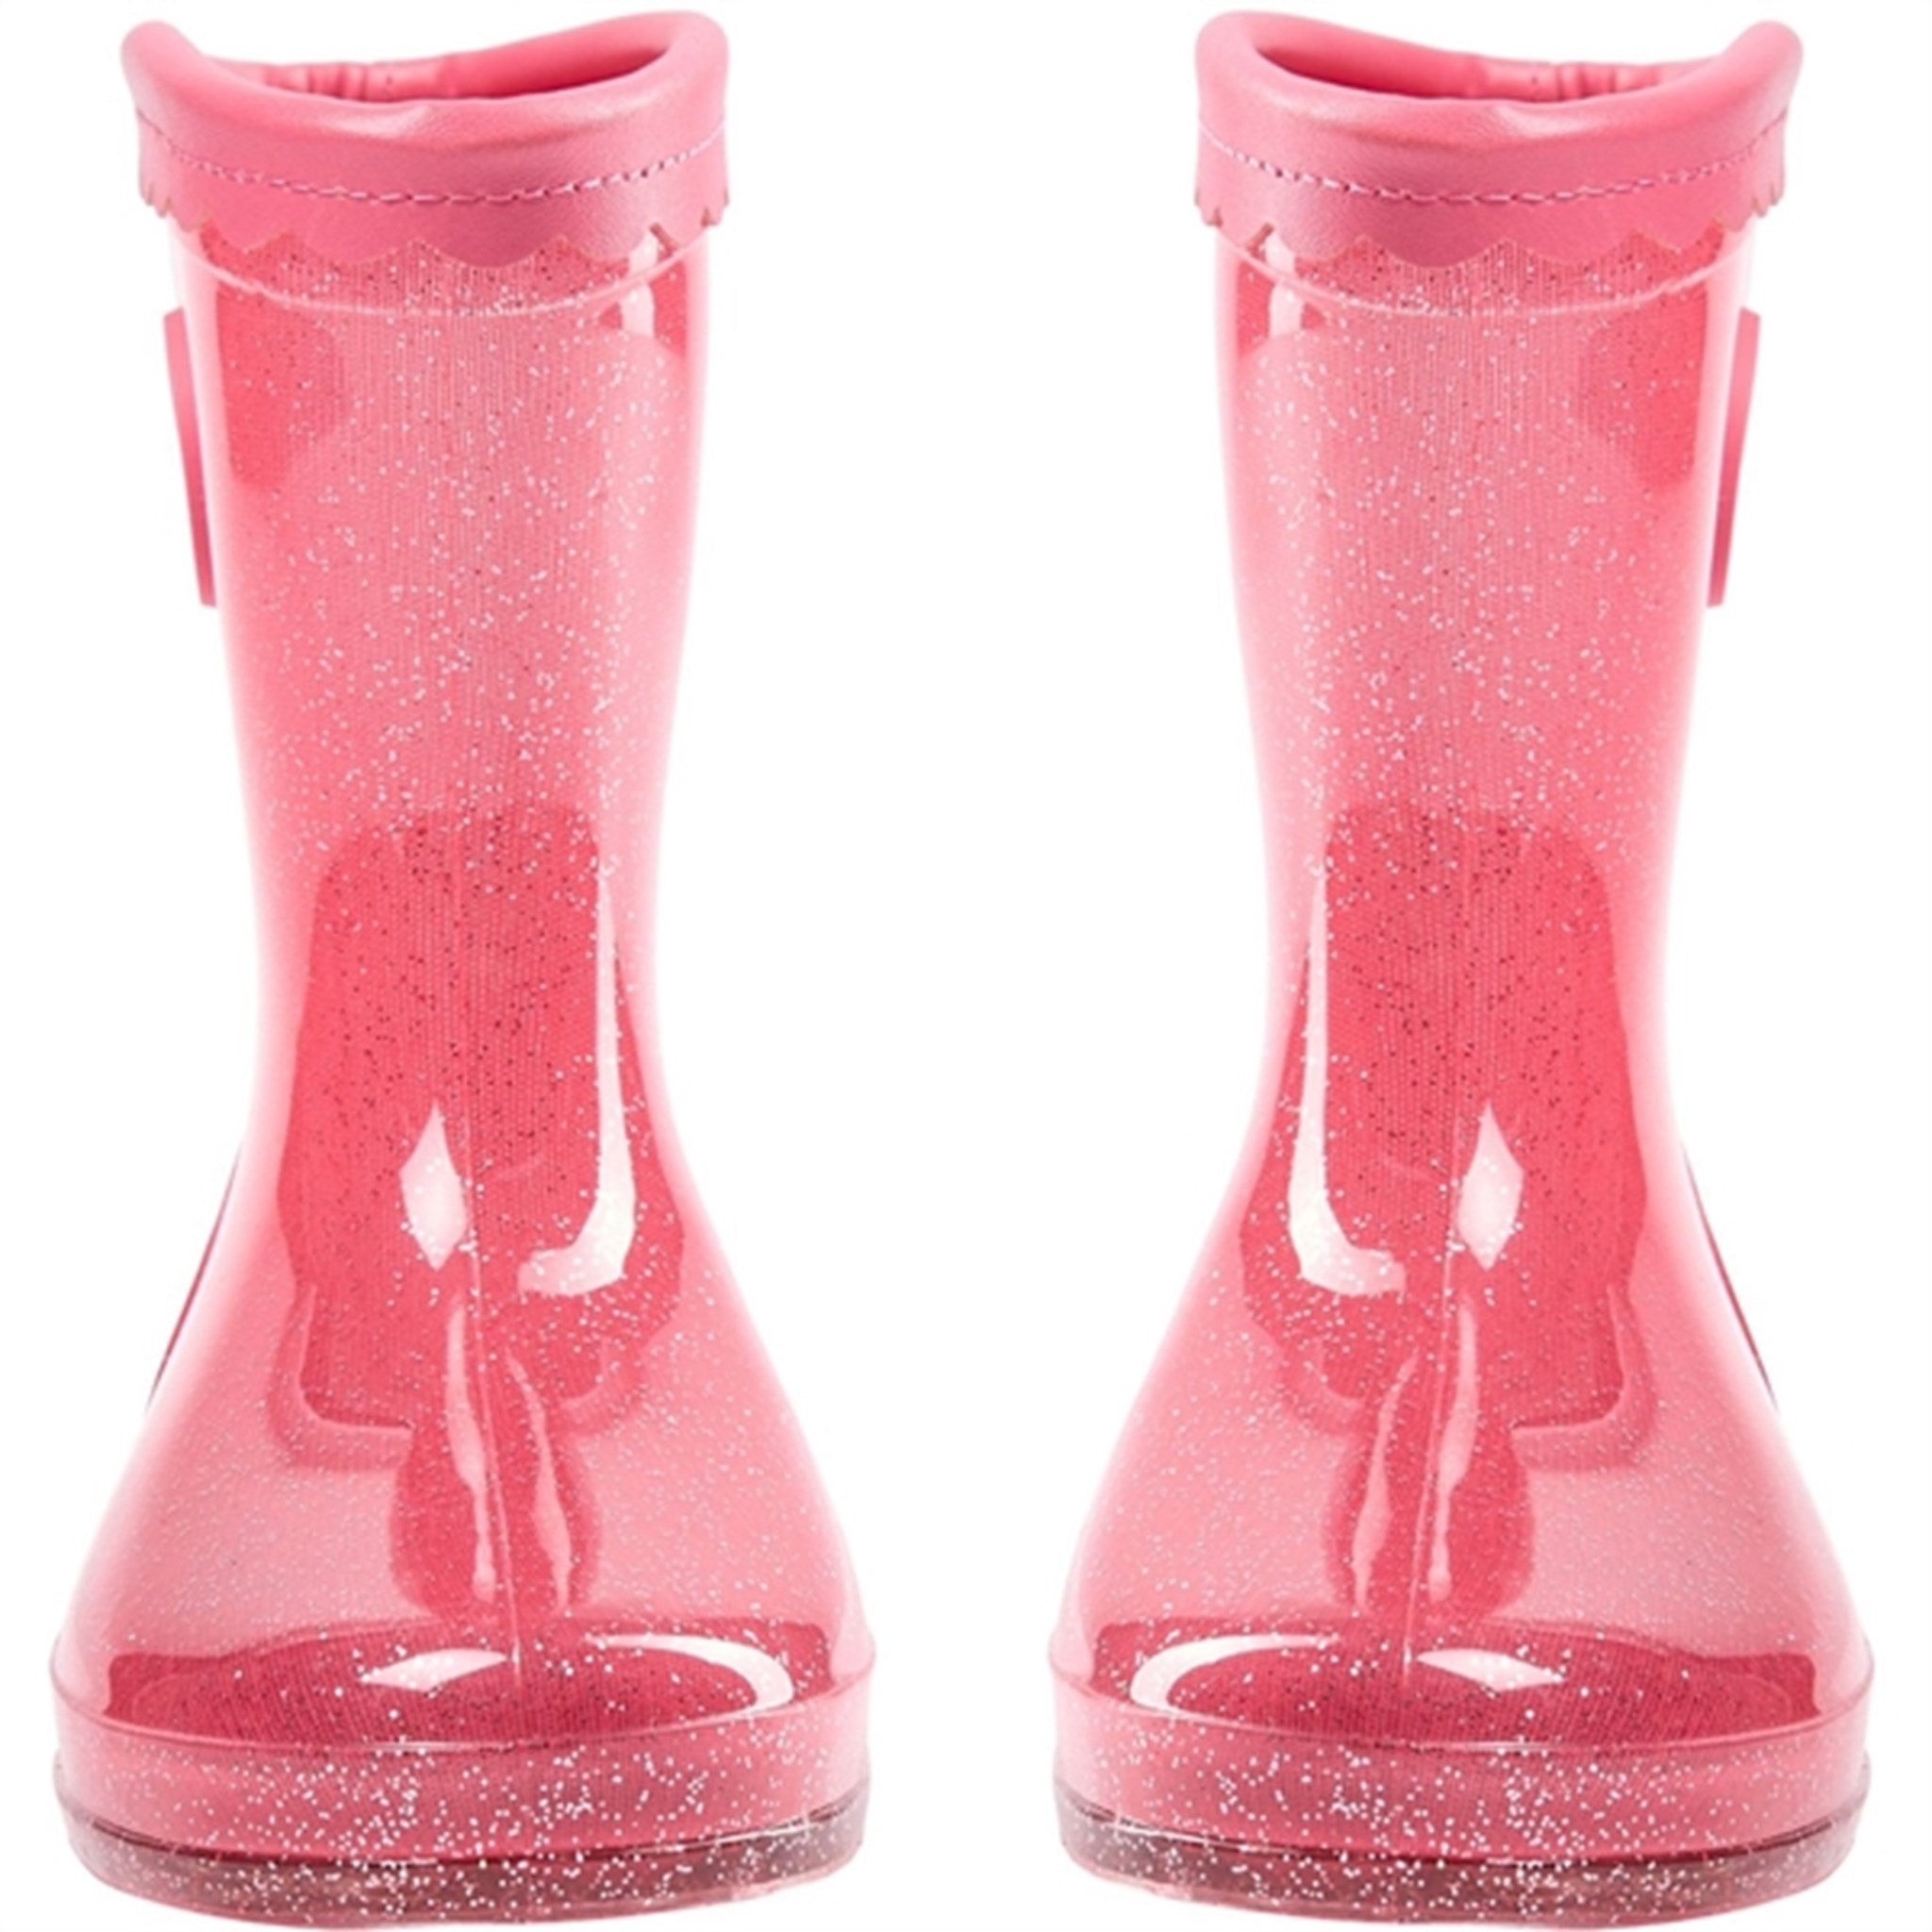 Sofie Schnoor Rubber Boots Coral Pink 3